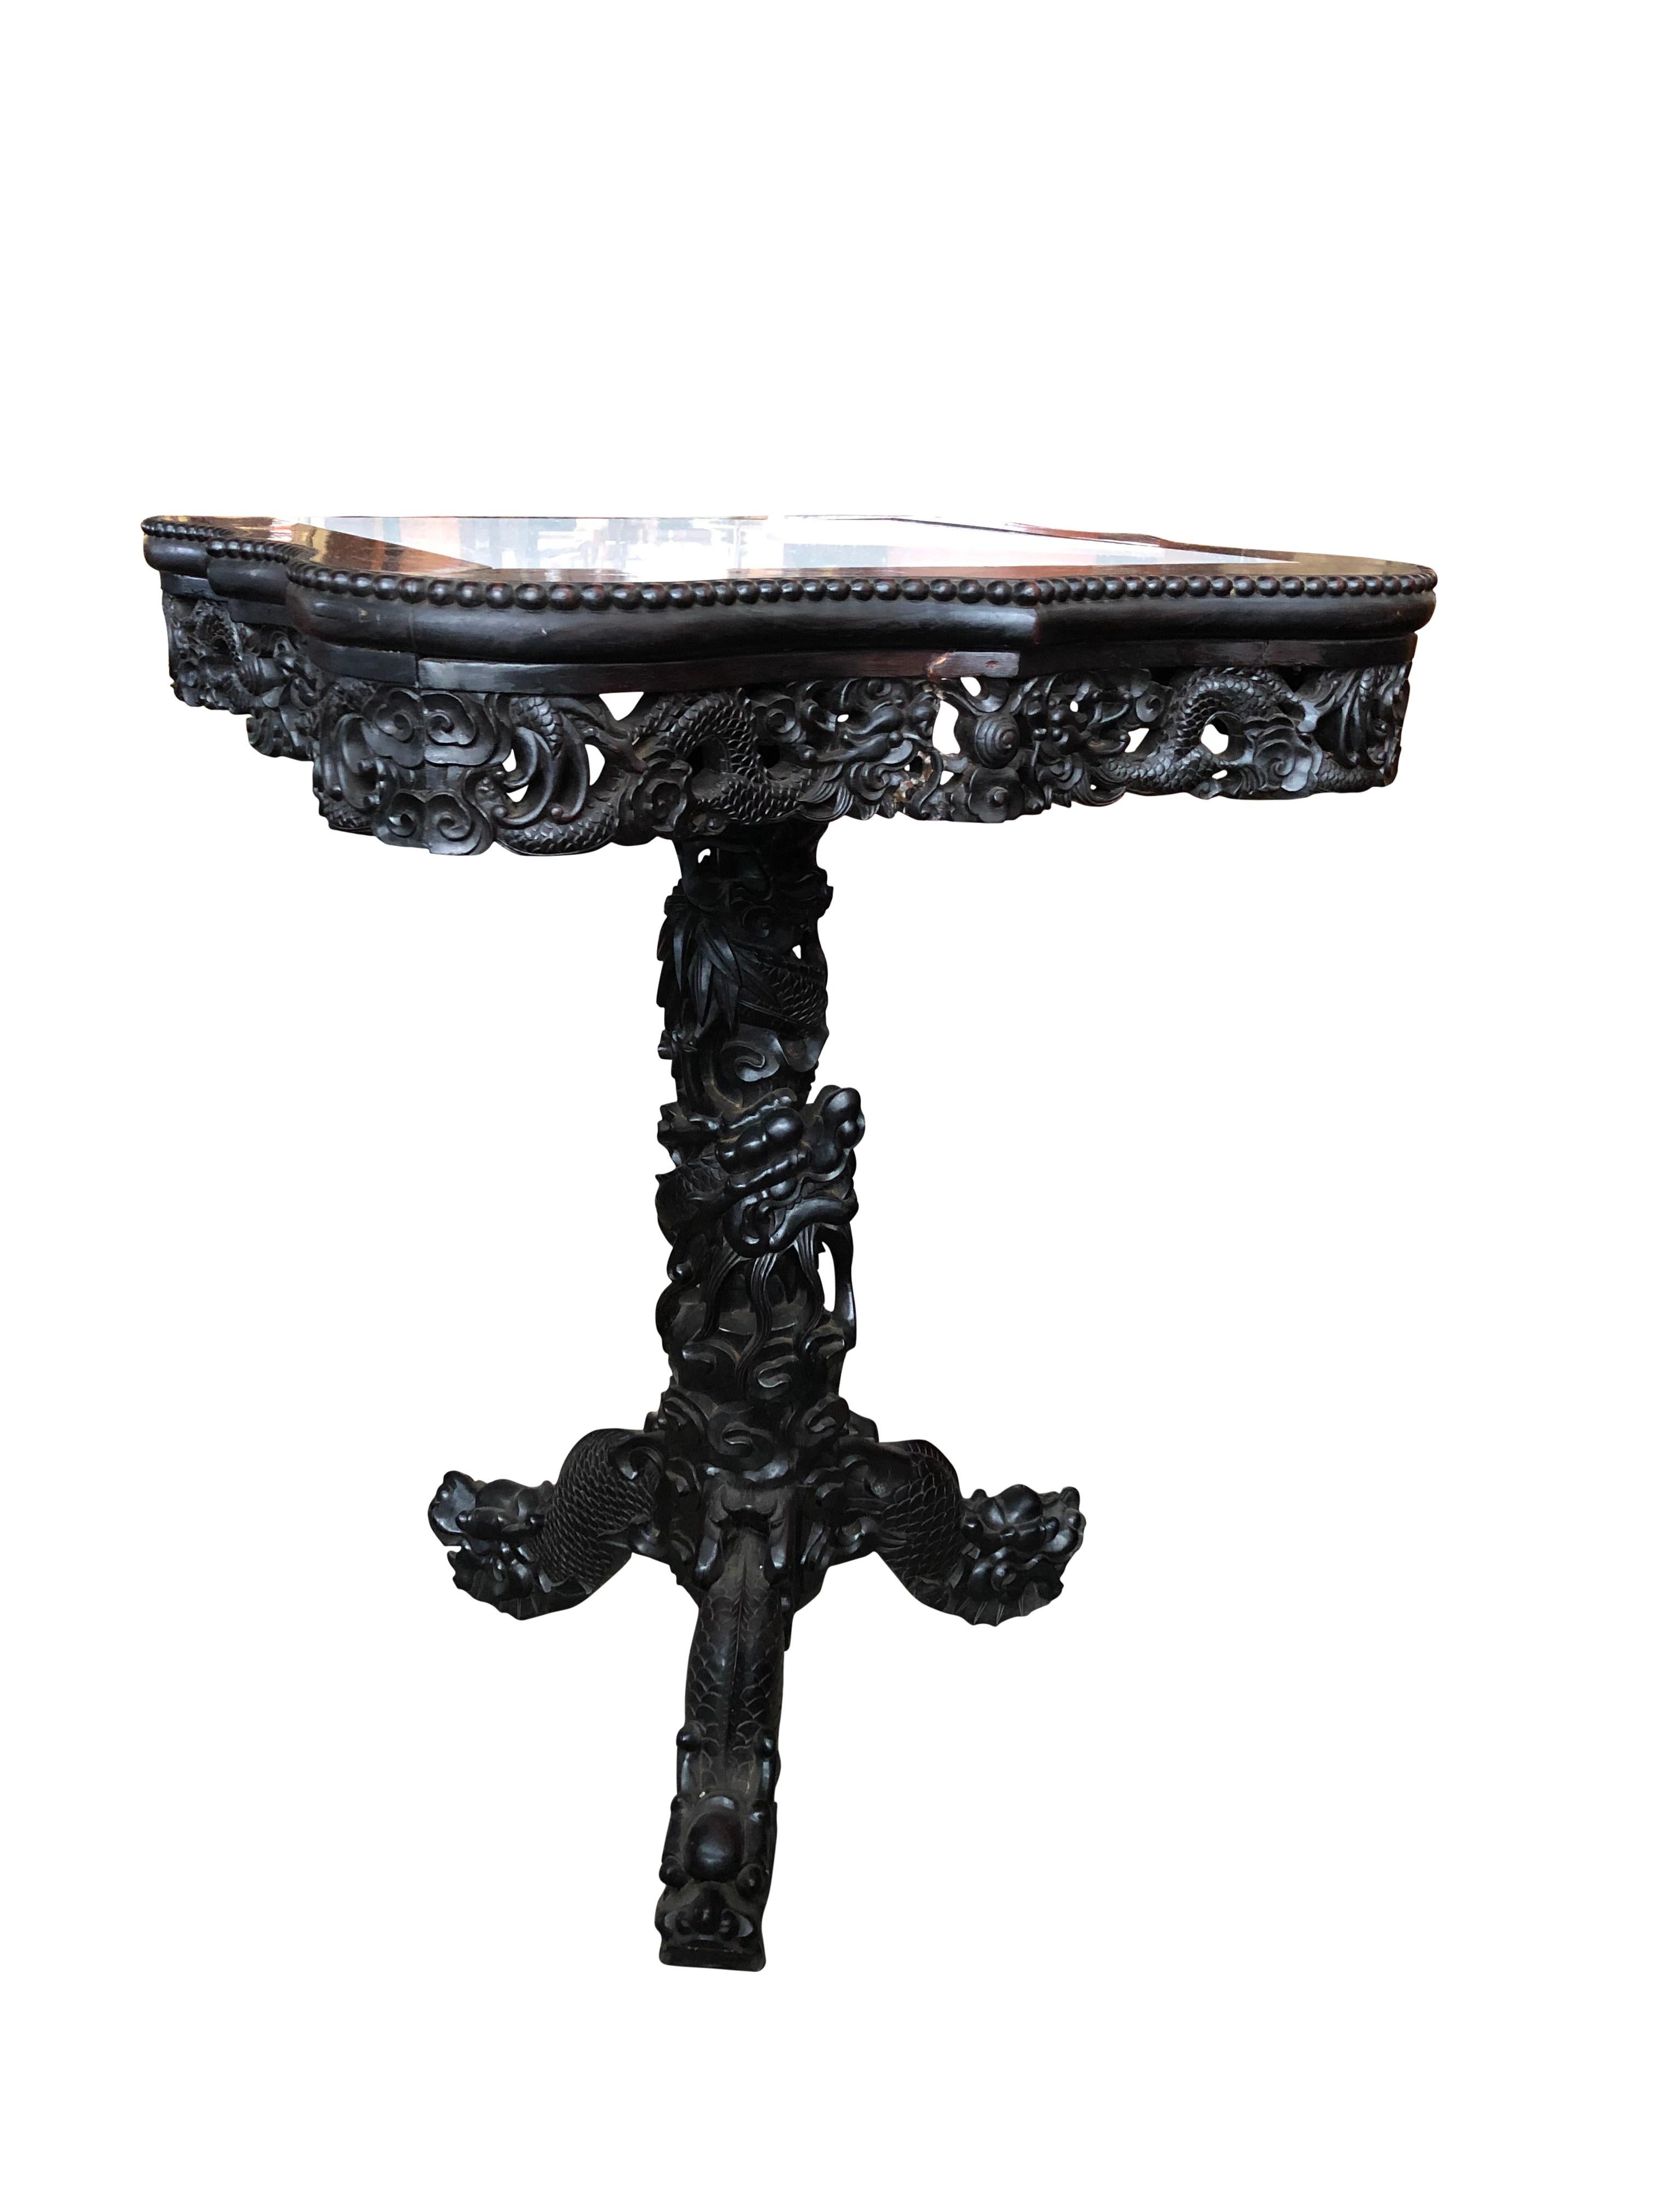 19th Century Chinese Carved Hardwood Center Table with Marble Top For Sale 10